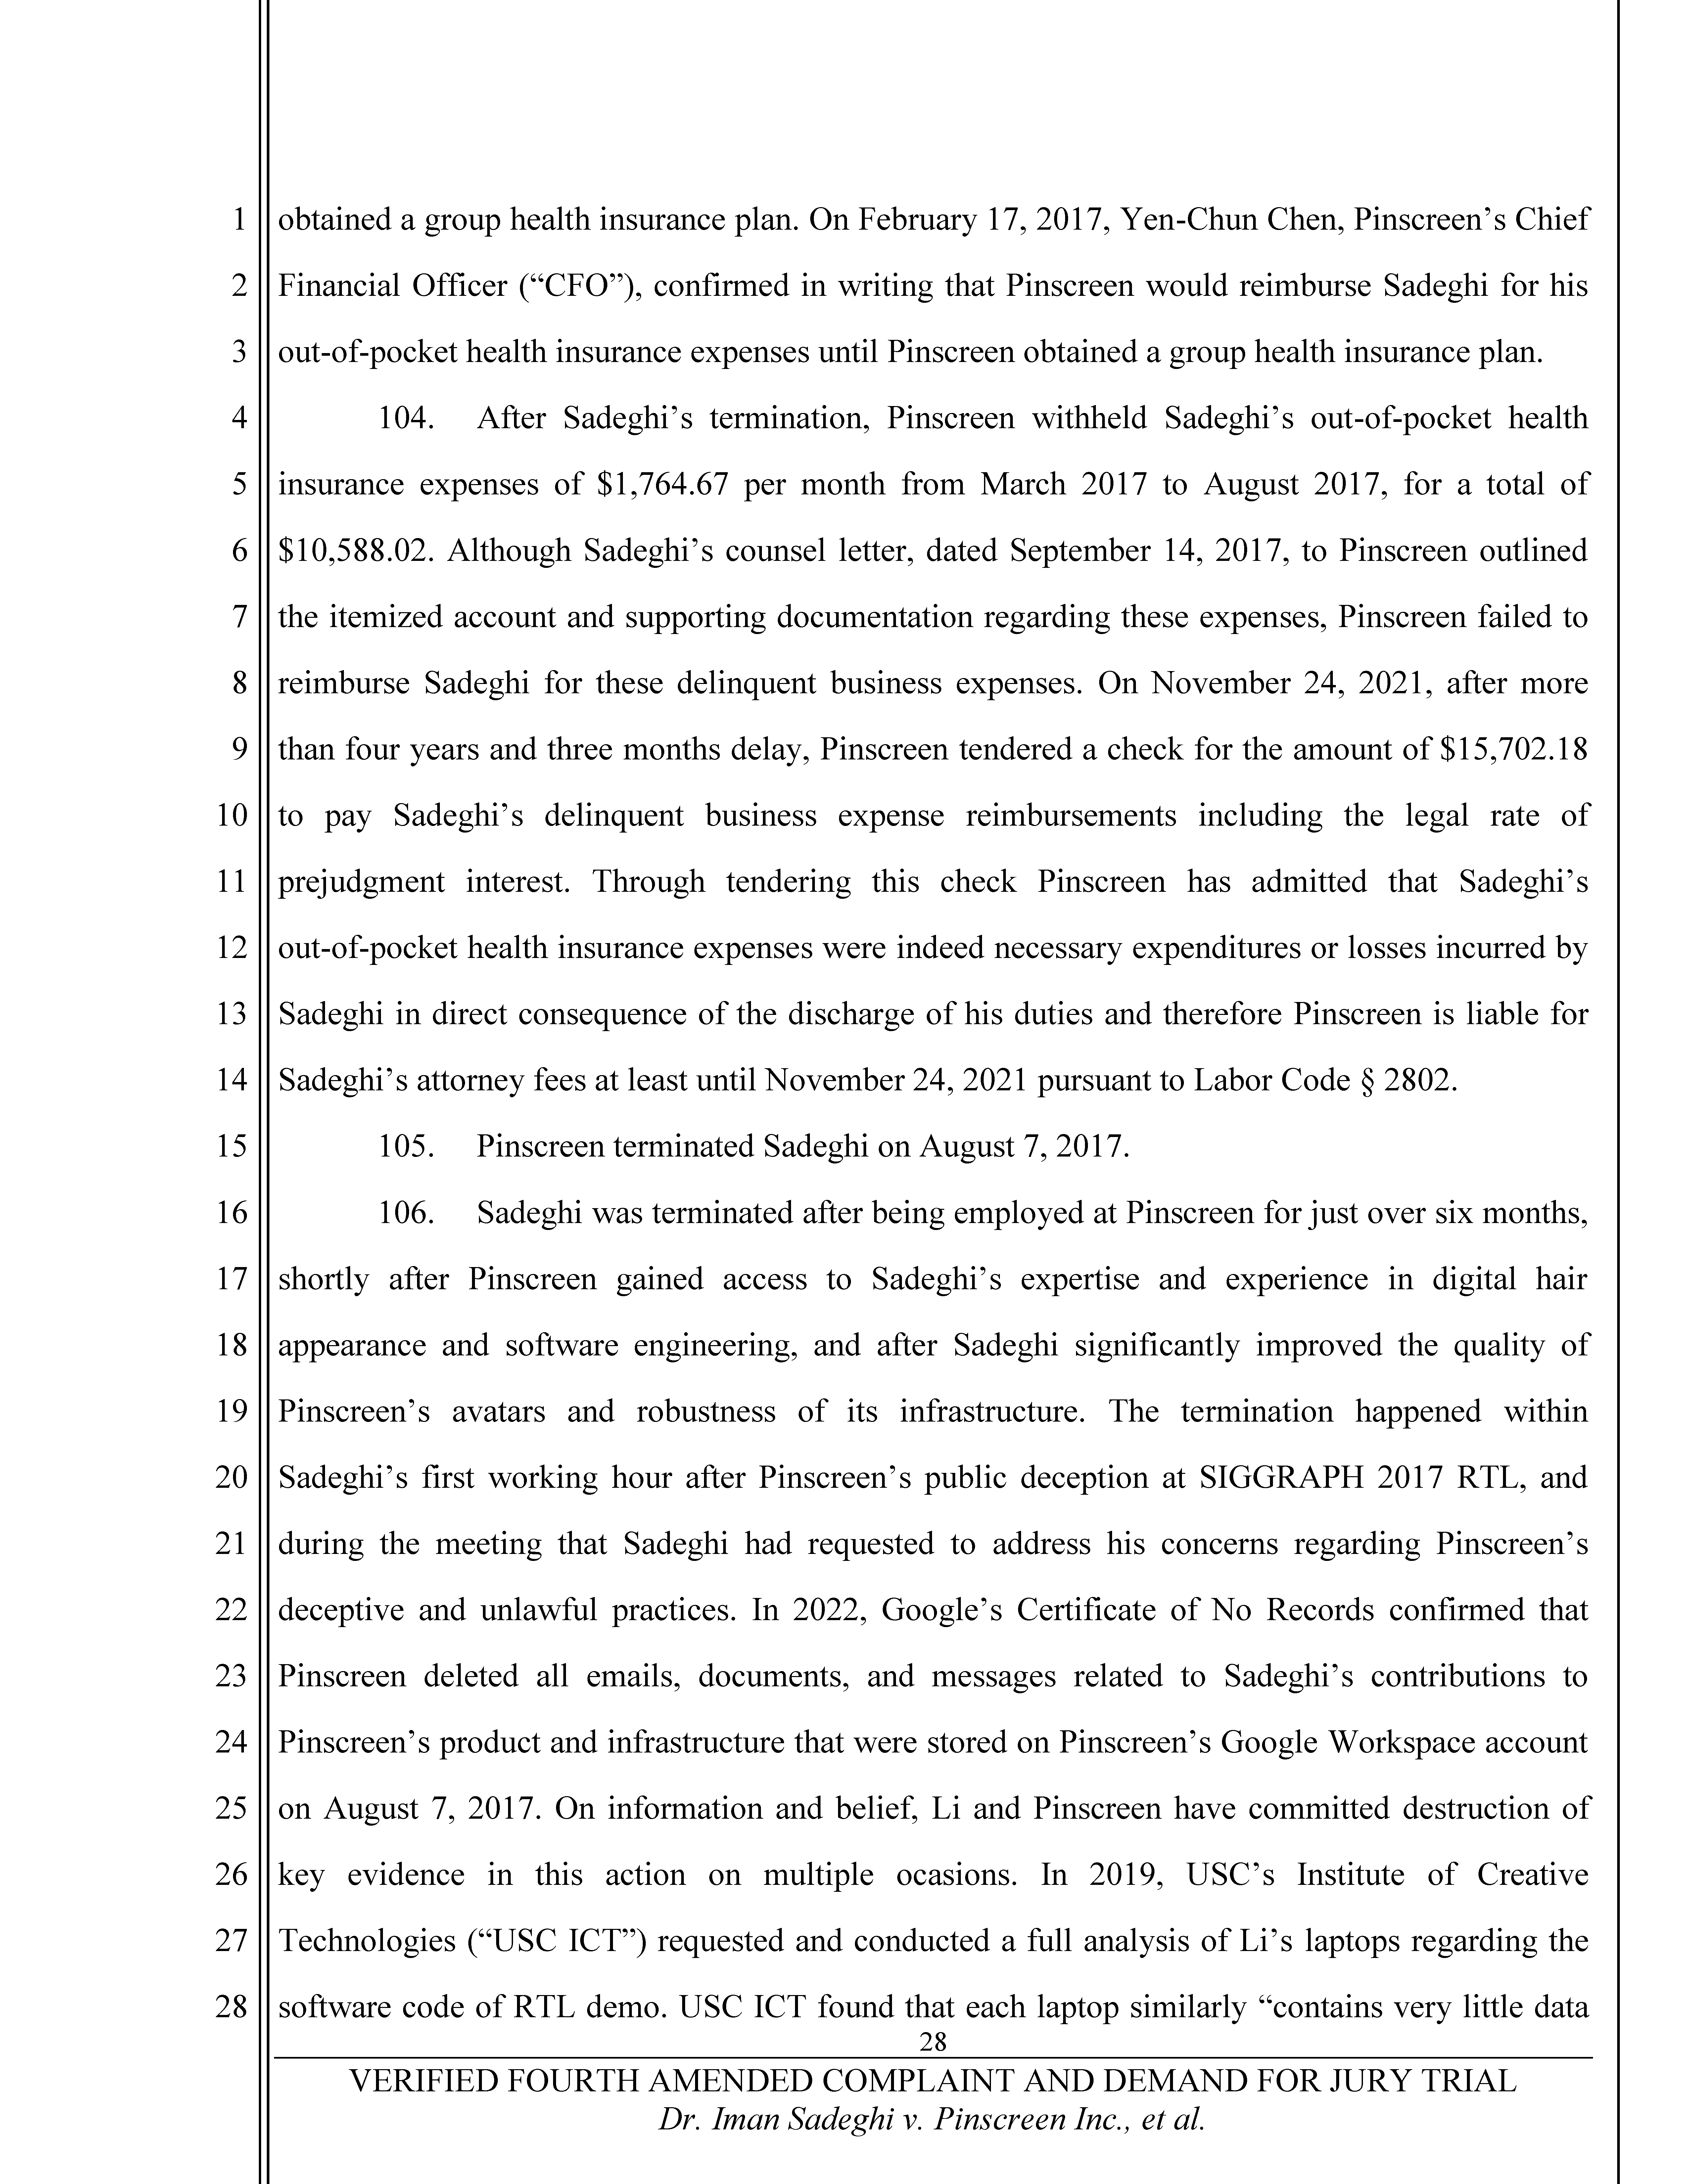 Fourth Amended Complaint (4AC) Page 29